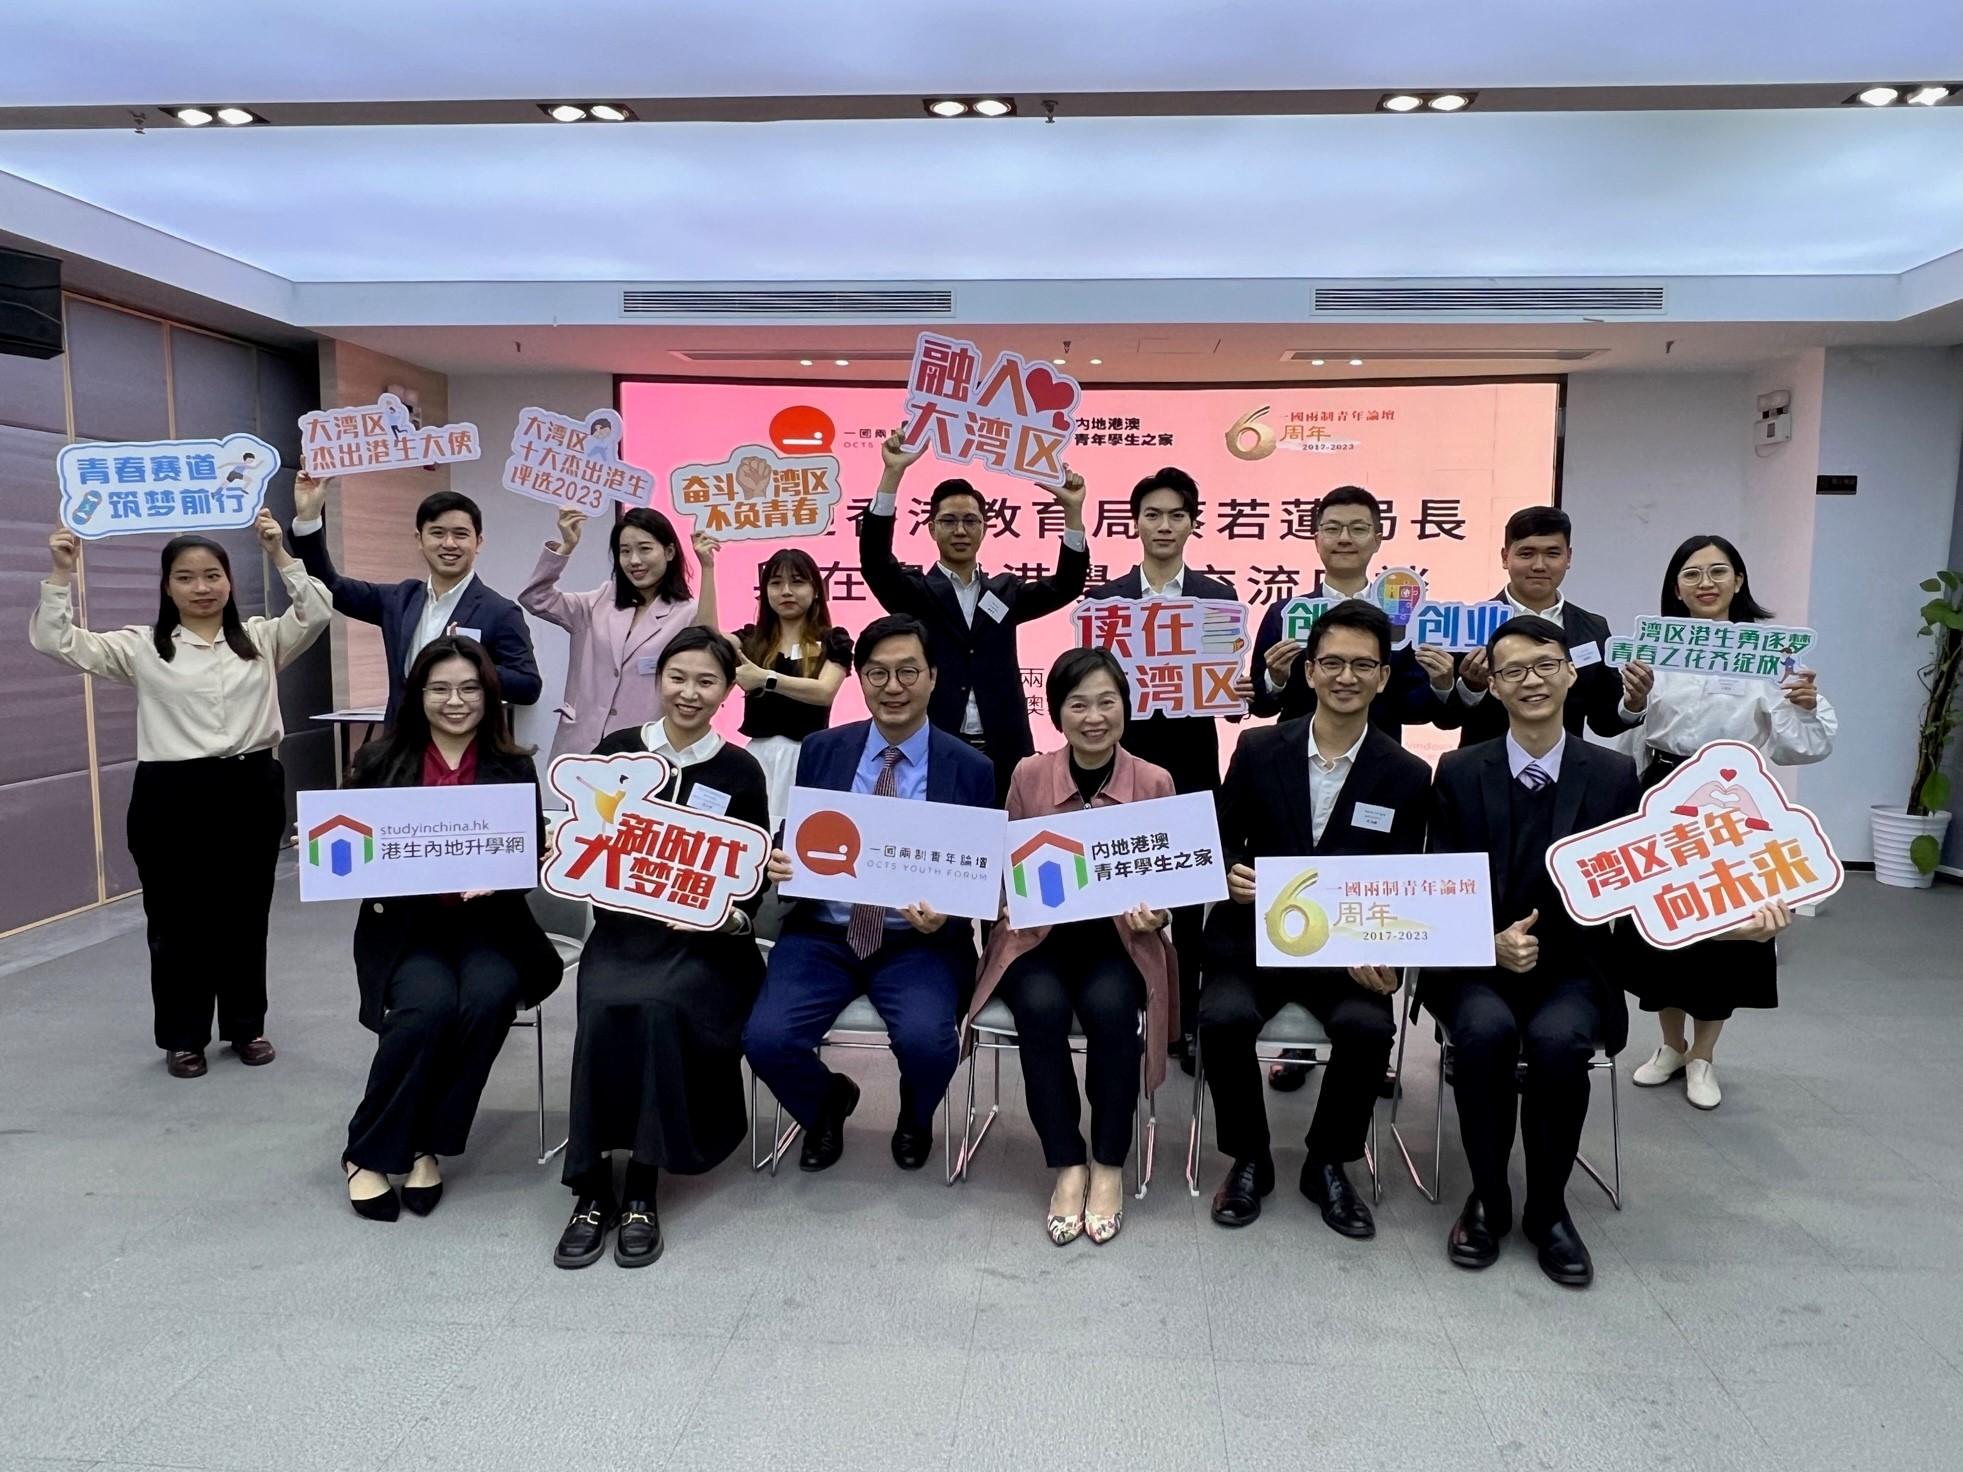 The Secretary for Education, Dr Choi Yuk-lin, today (March 8) visited the Support and Development Centre for Hong Kong and Macao Youths in Mainland China. Photo shows Dr Choi (front row, third right) with Hong Kong students and graduates of Mainland higher education institutions.